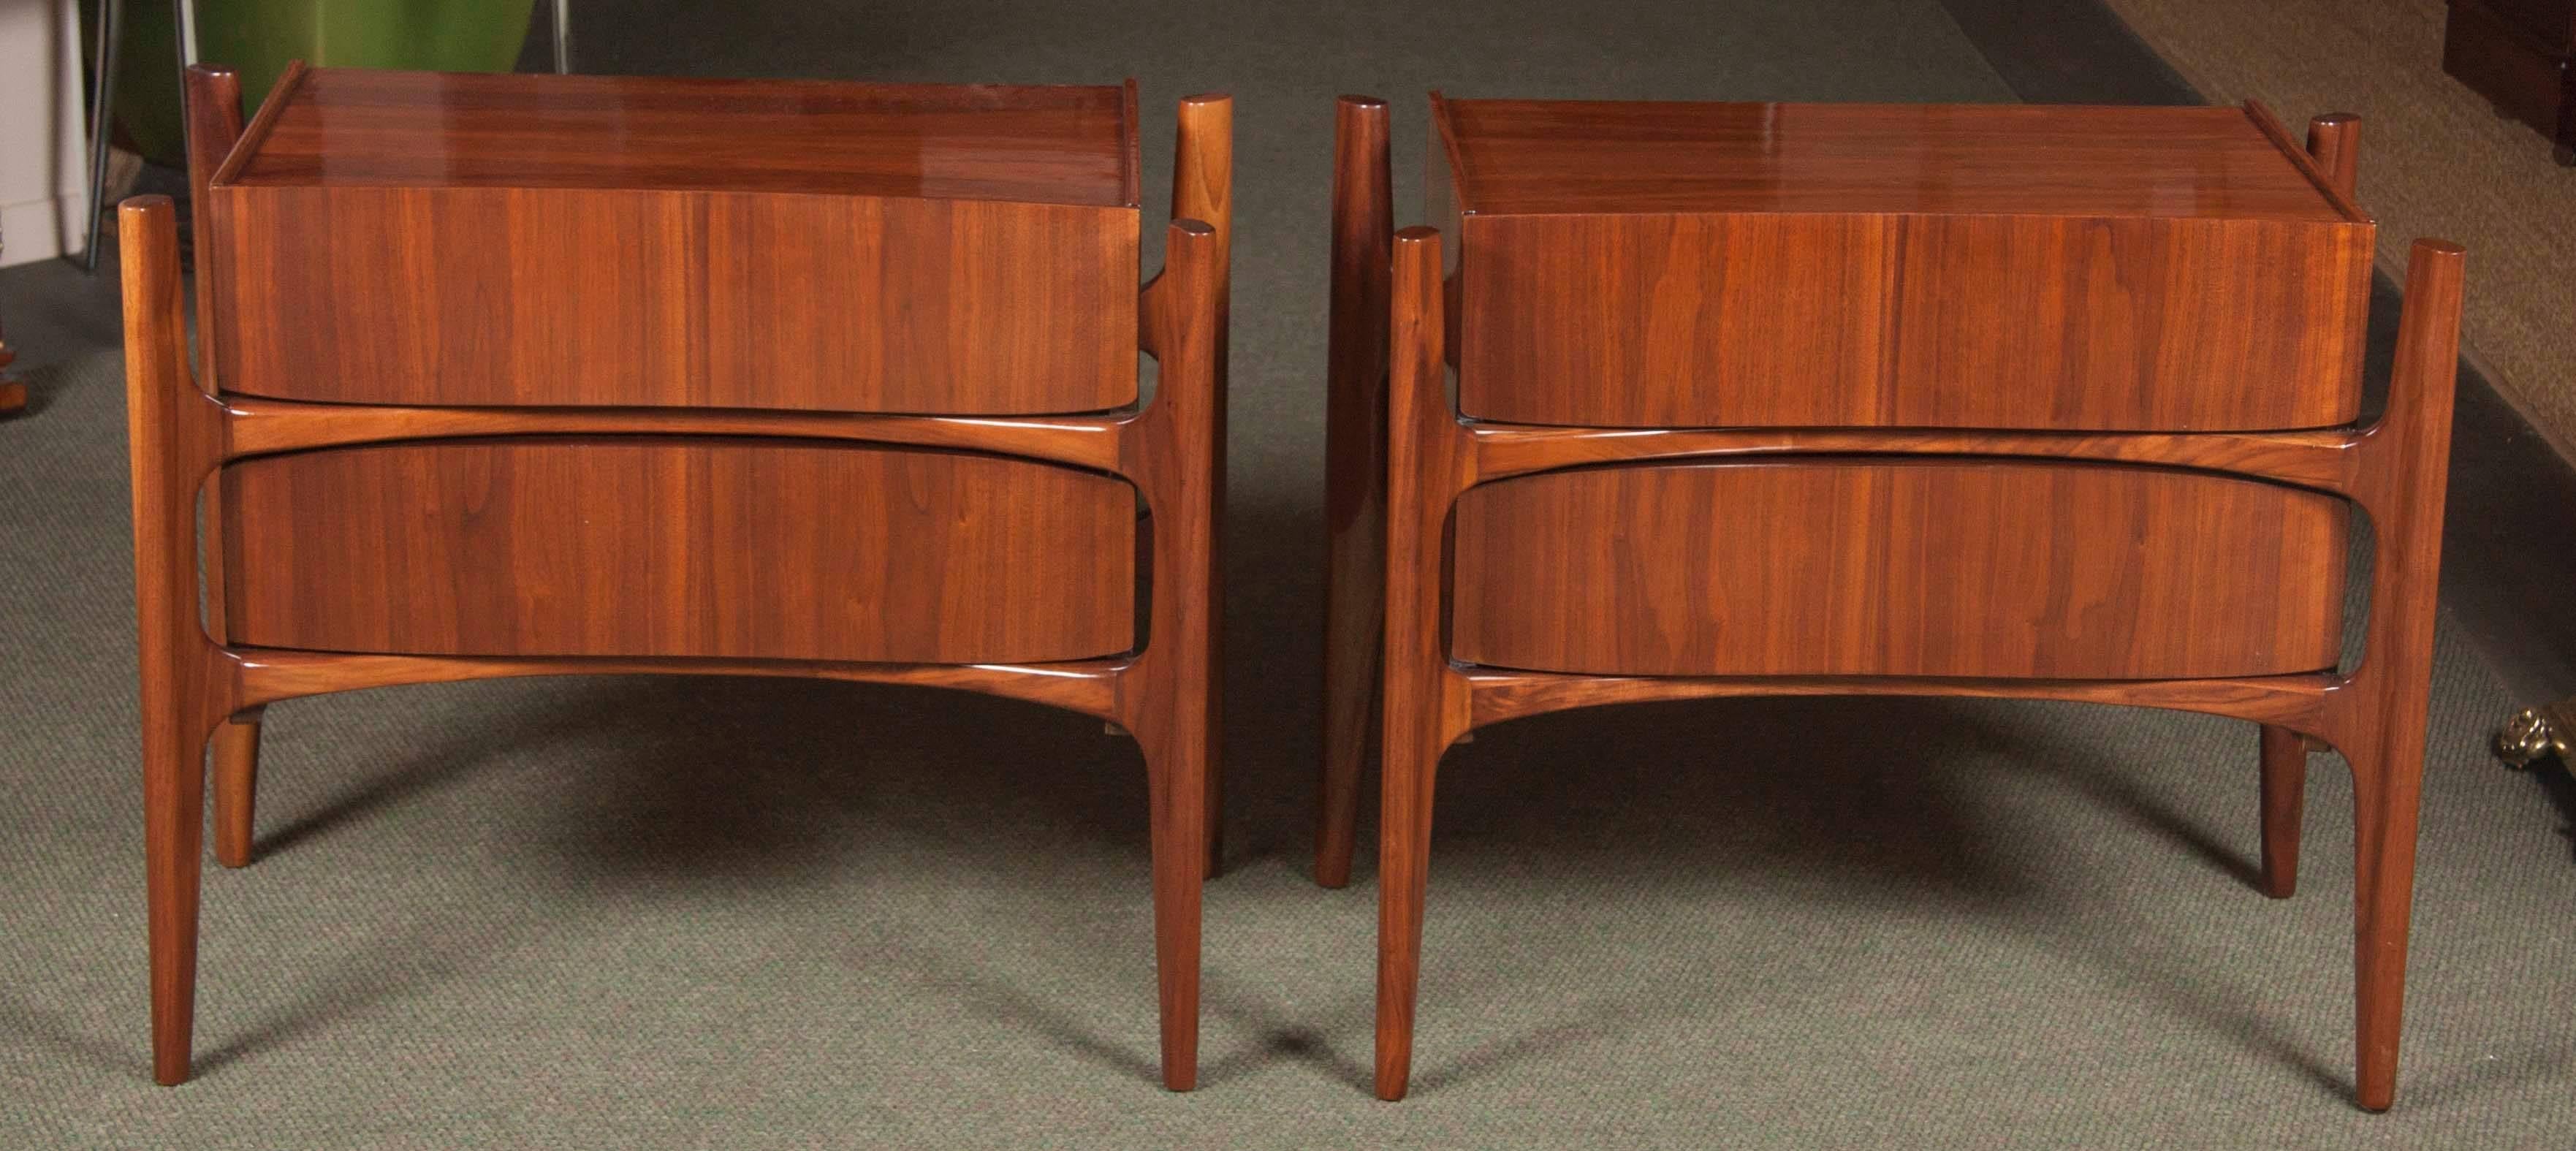 Modern Pair of Bedside Tables by Edmond Spence